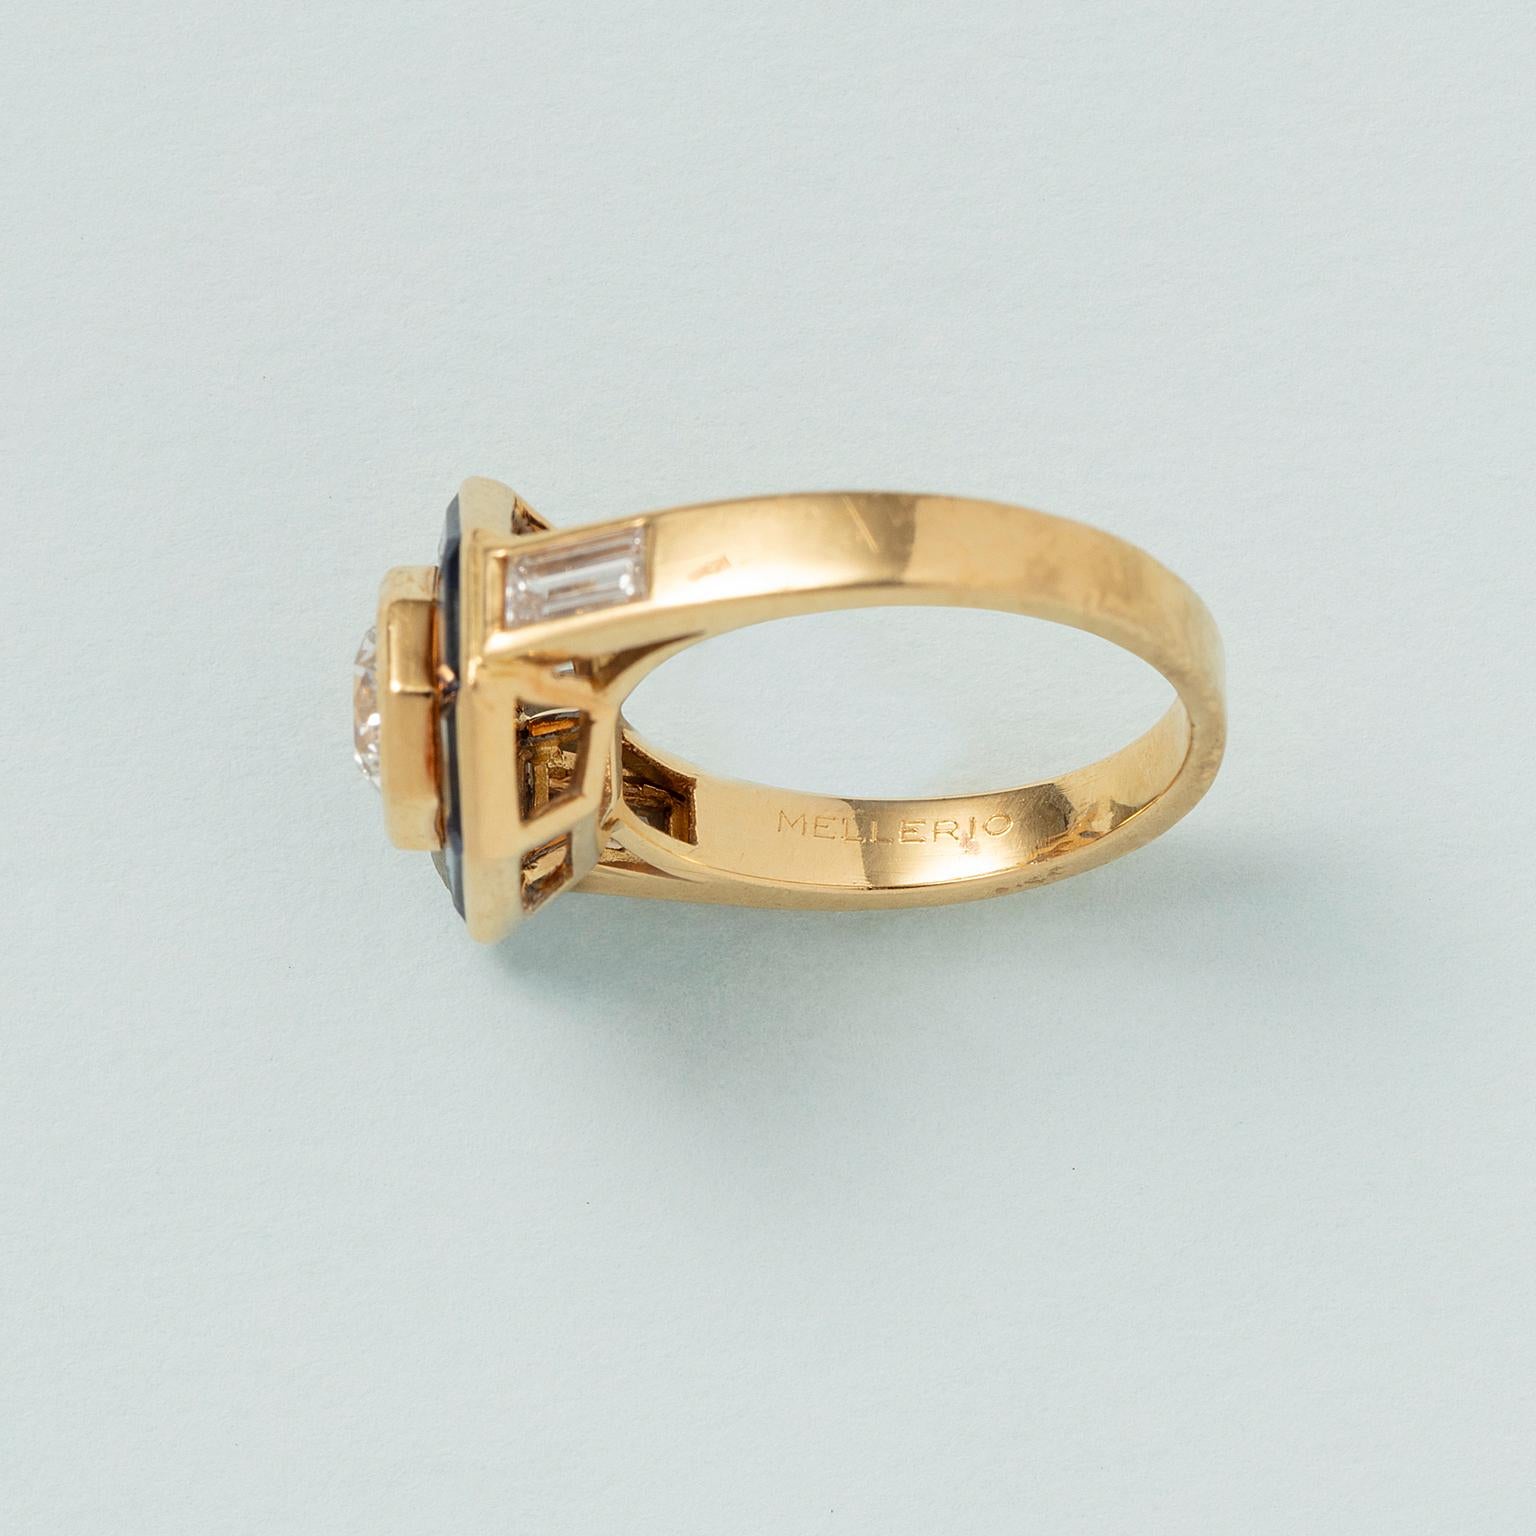 An 18 Carat Gold Mellerio Gold Ring with Diamond and Sapphire For Sale 2